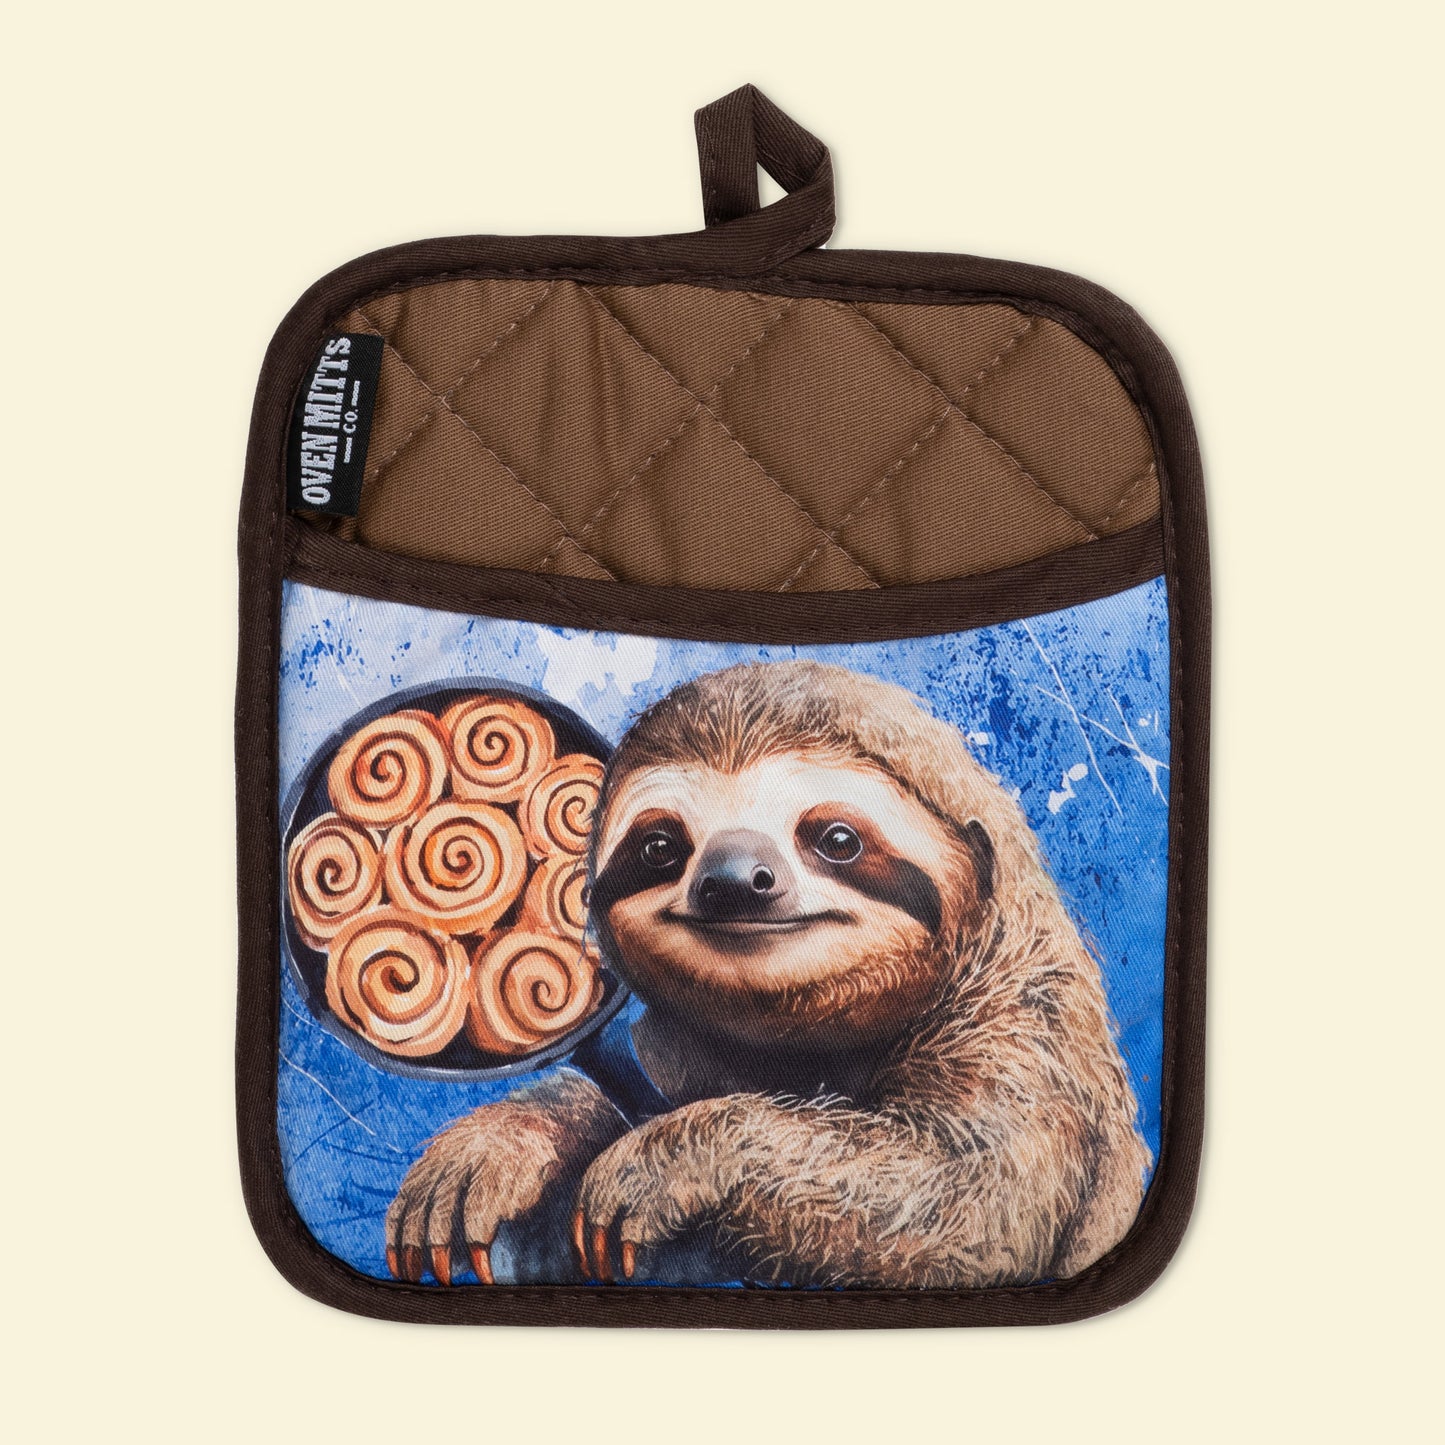 Sloth Just A Few More Minutes Oven Potholder funny quality